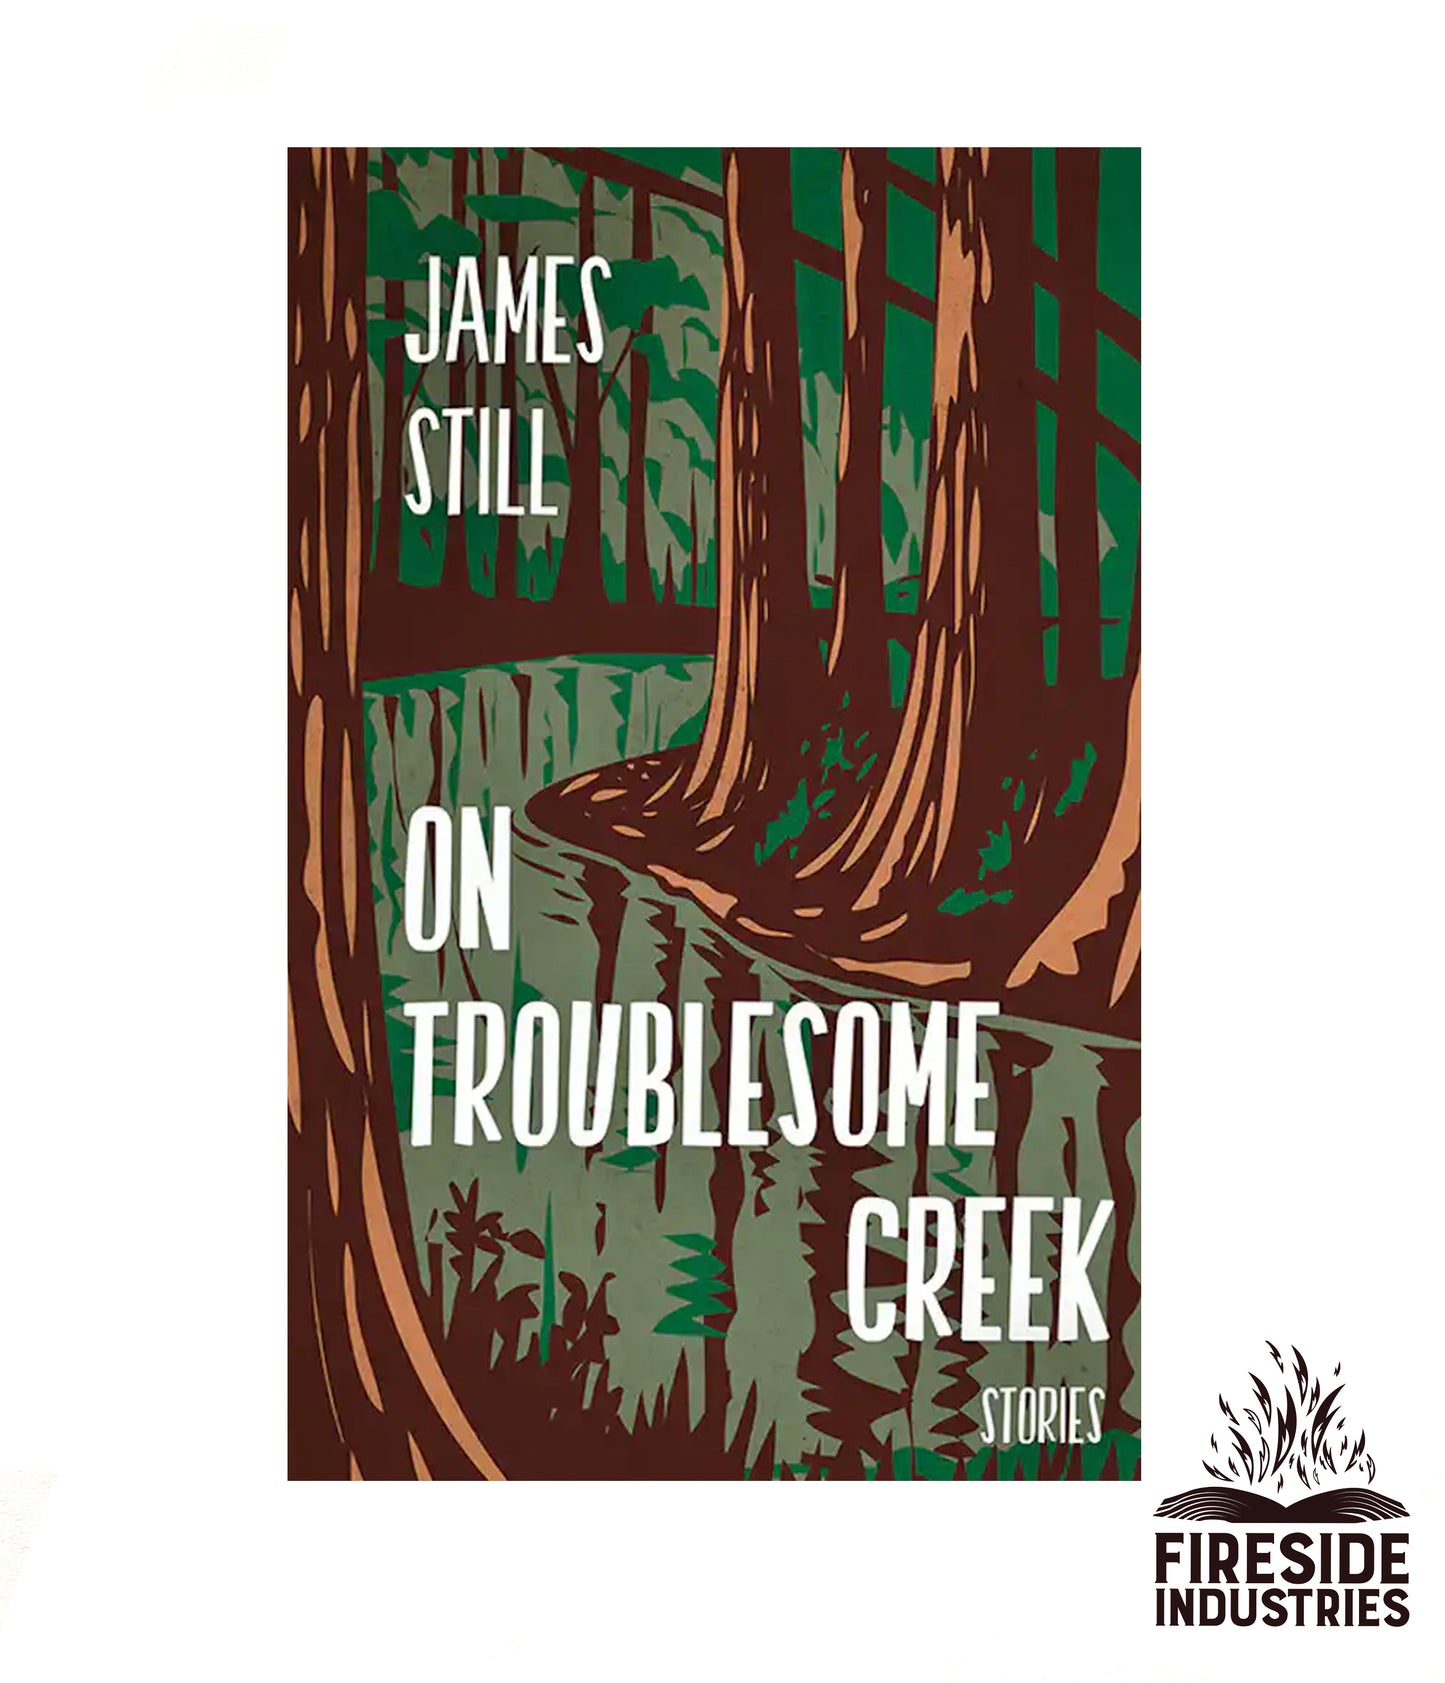 On Troublesome Creek